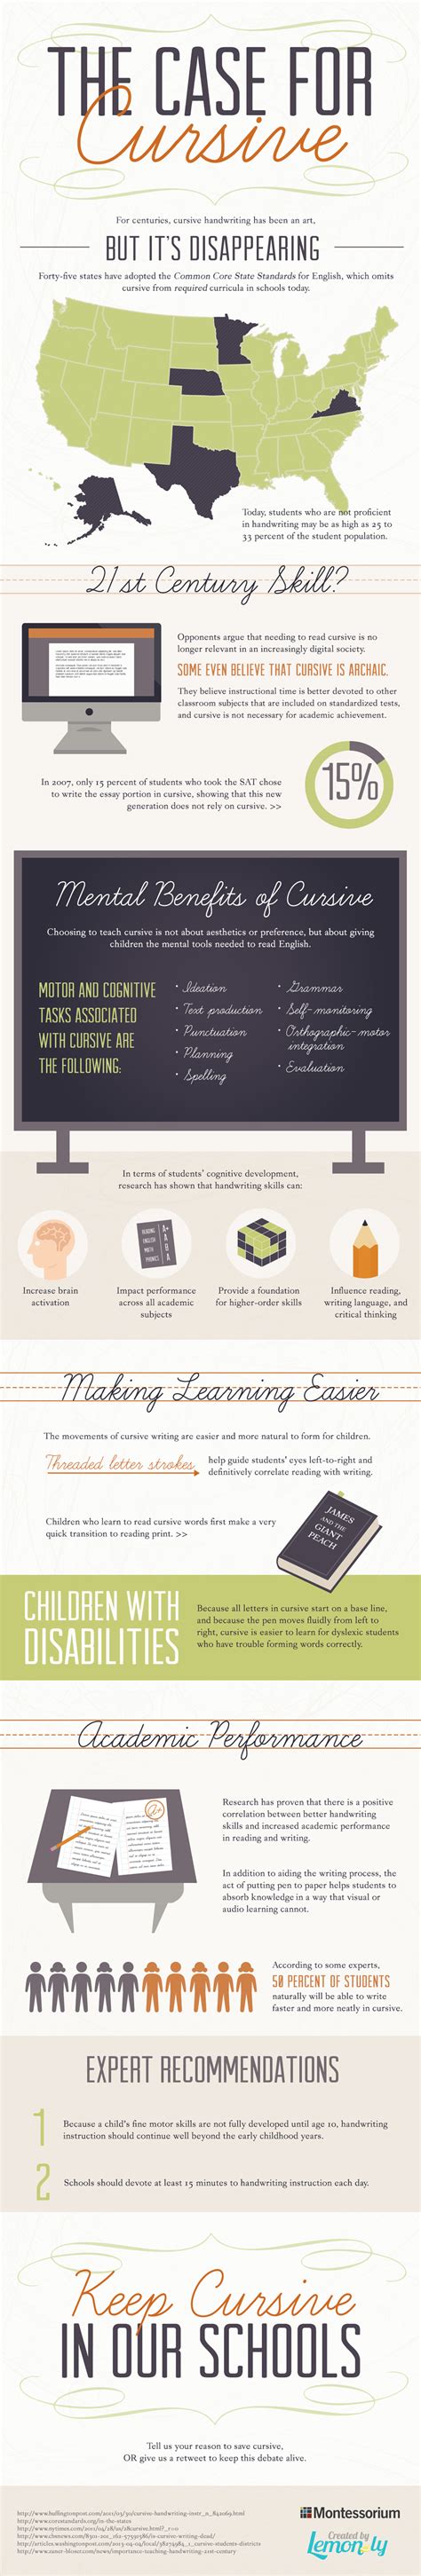 The Case For Cursive A Cursive Writing Facts Infographic